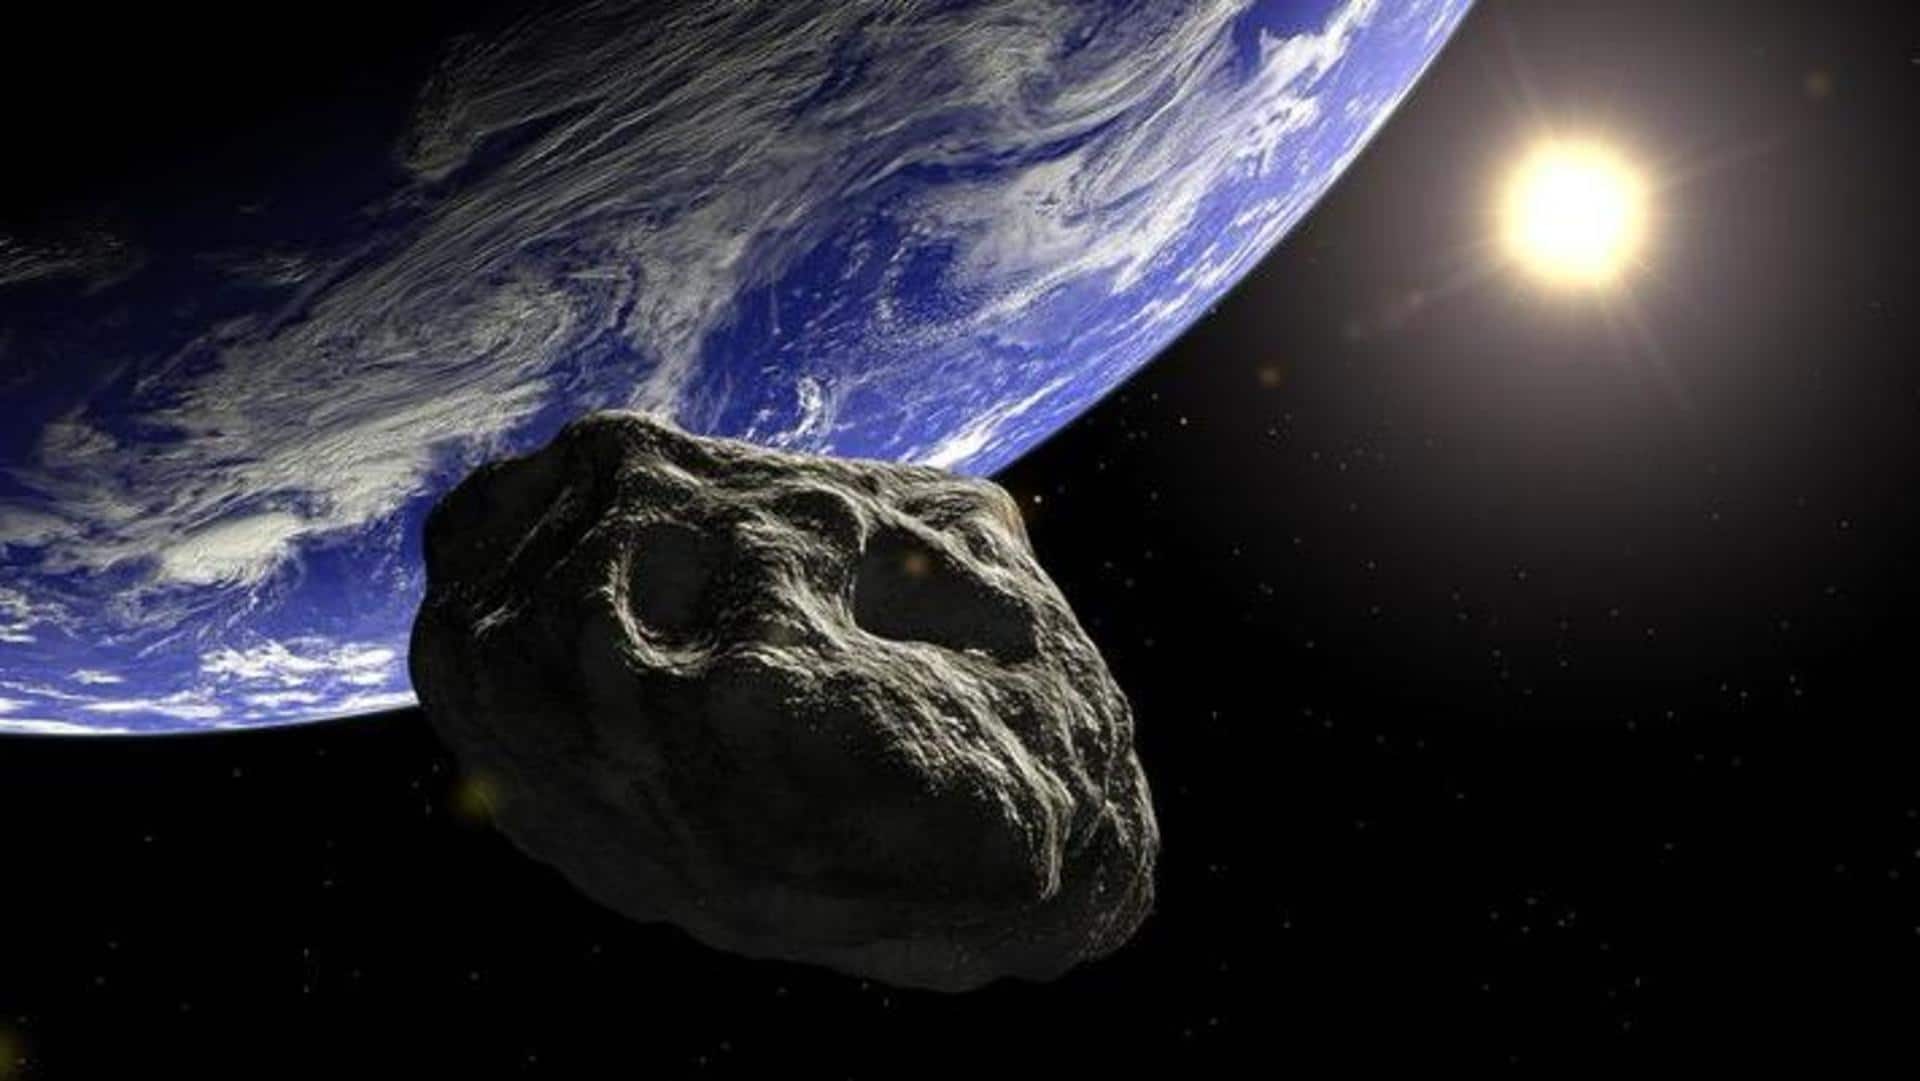 Skyscrapersized asteroid to cross between Earth and Moon's orbit tomorrow